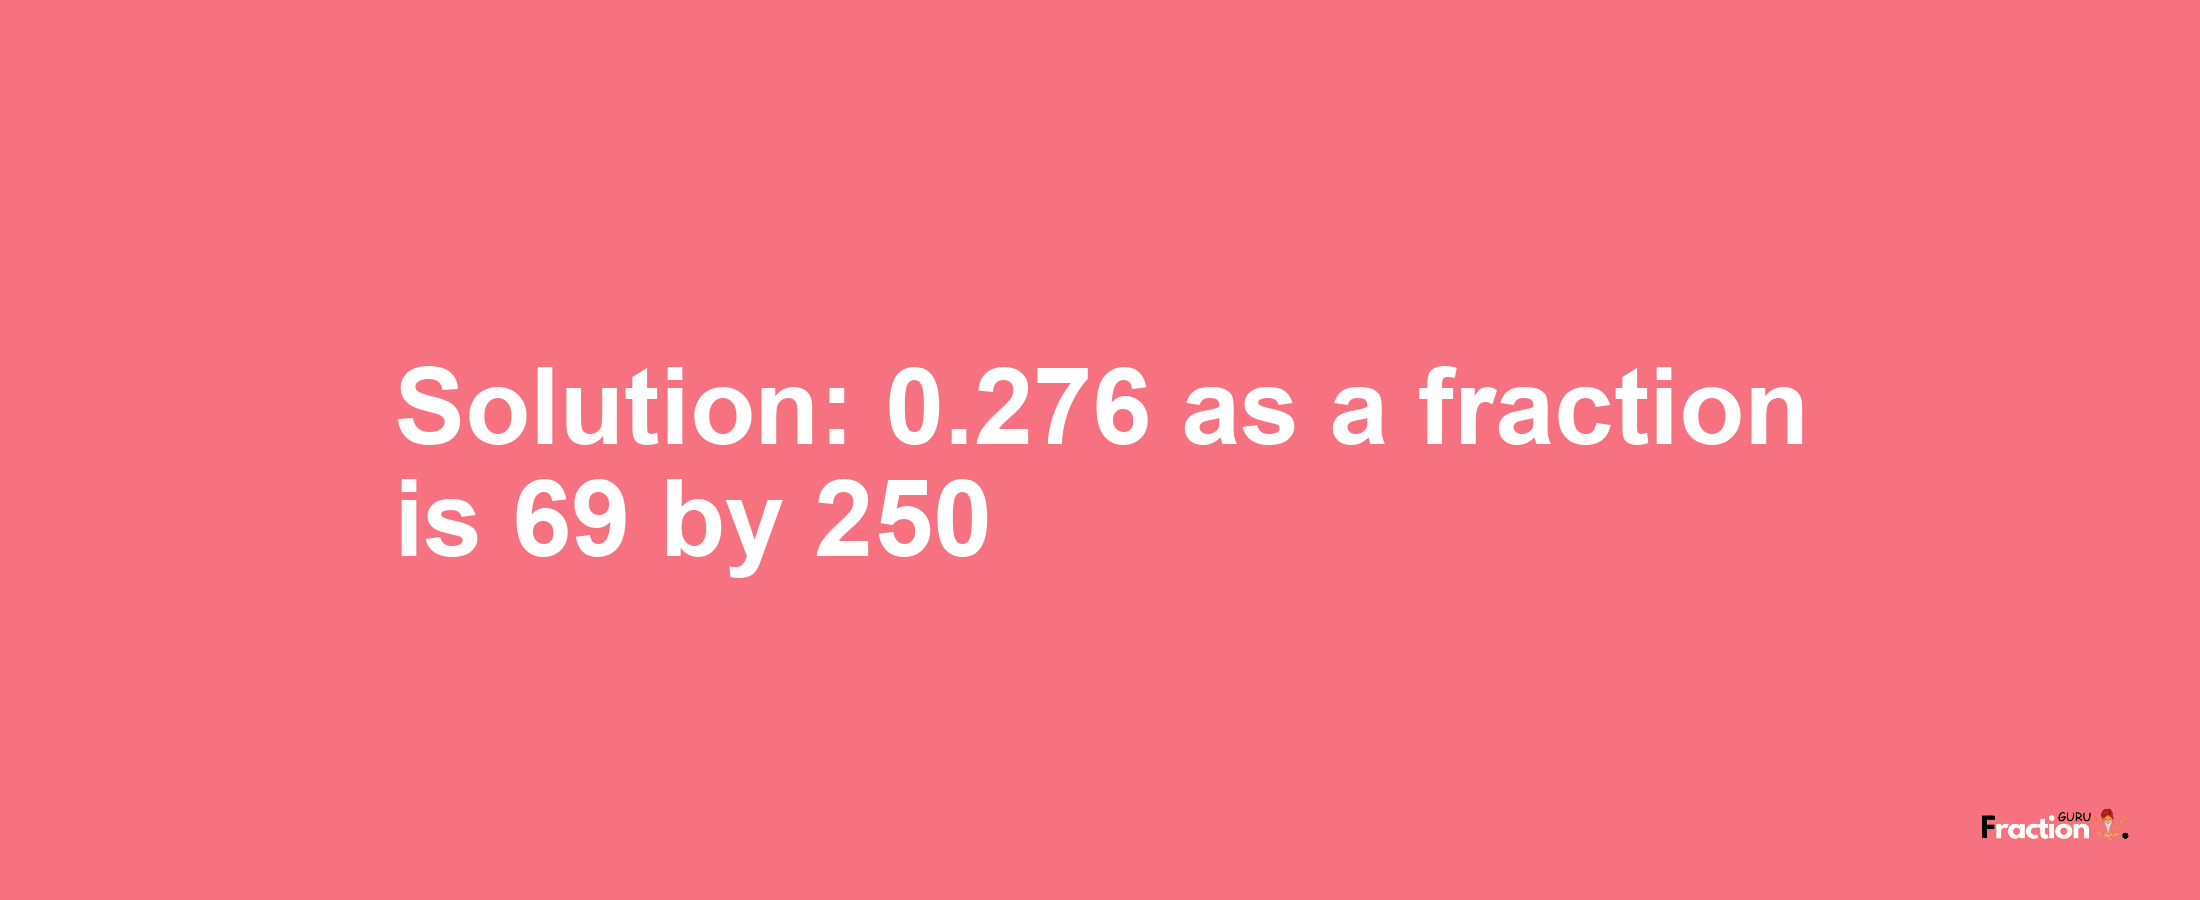 Solution:0.276 as a fraction is 69/250